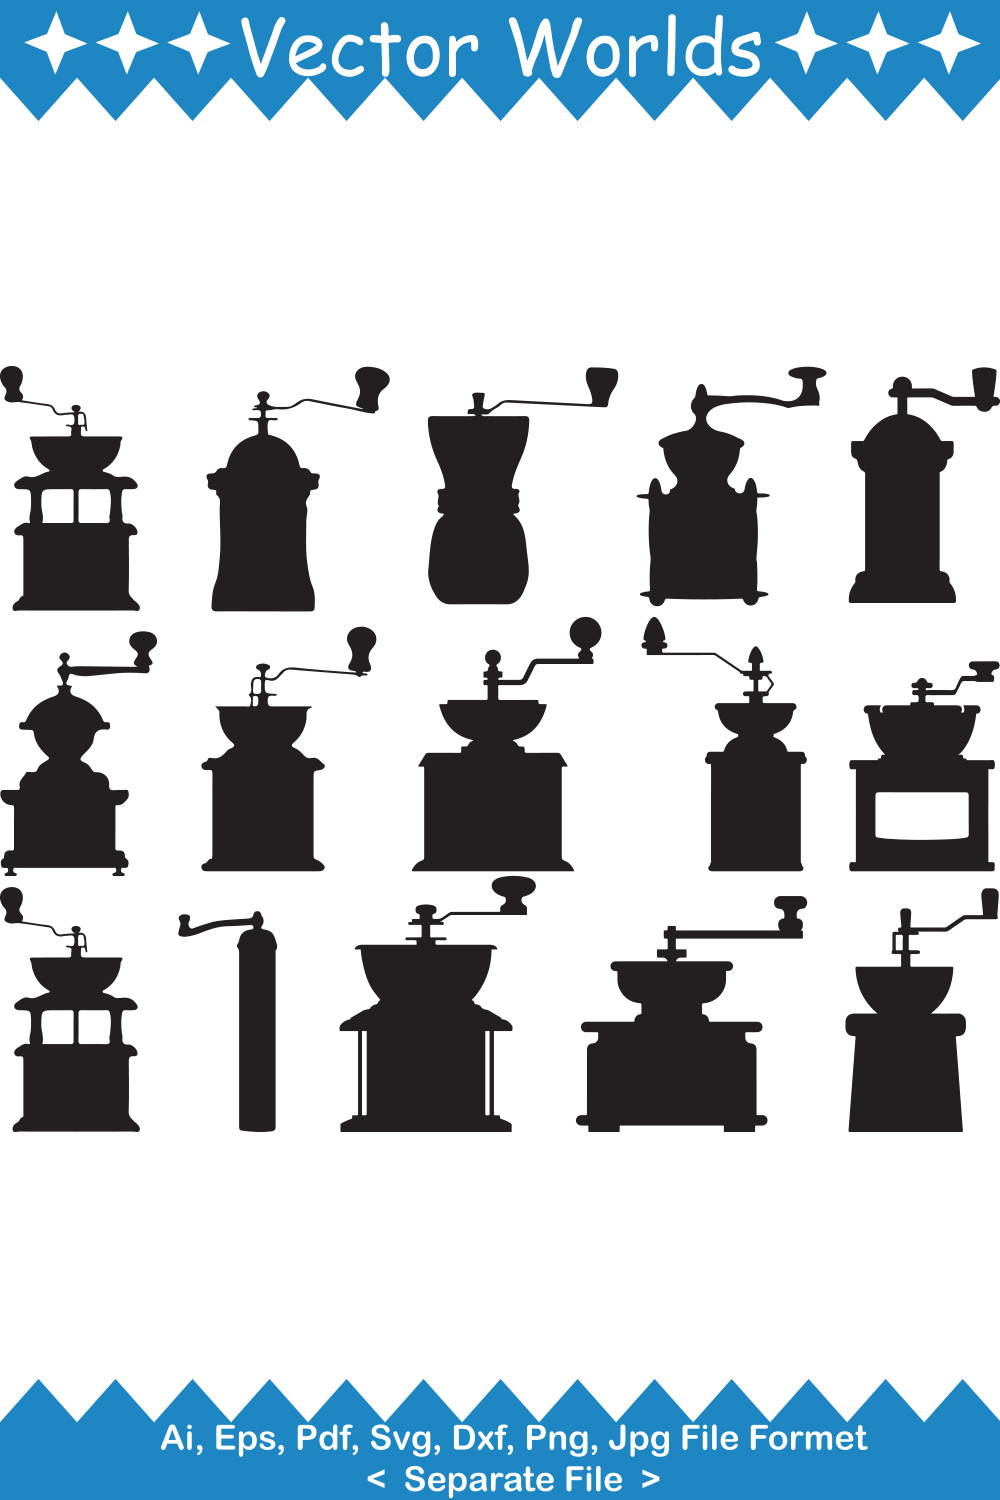 Set of beautiful vector images of silhouettes of coffee grinders